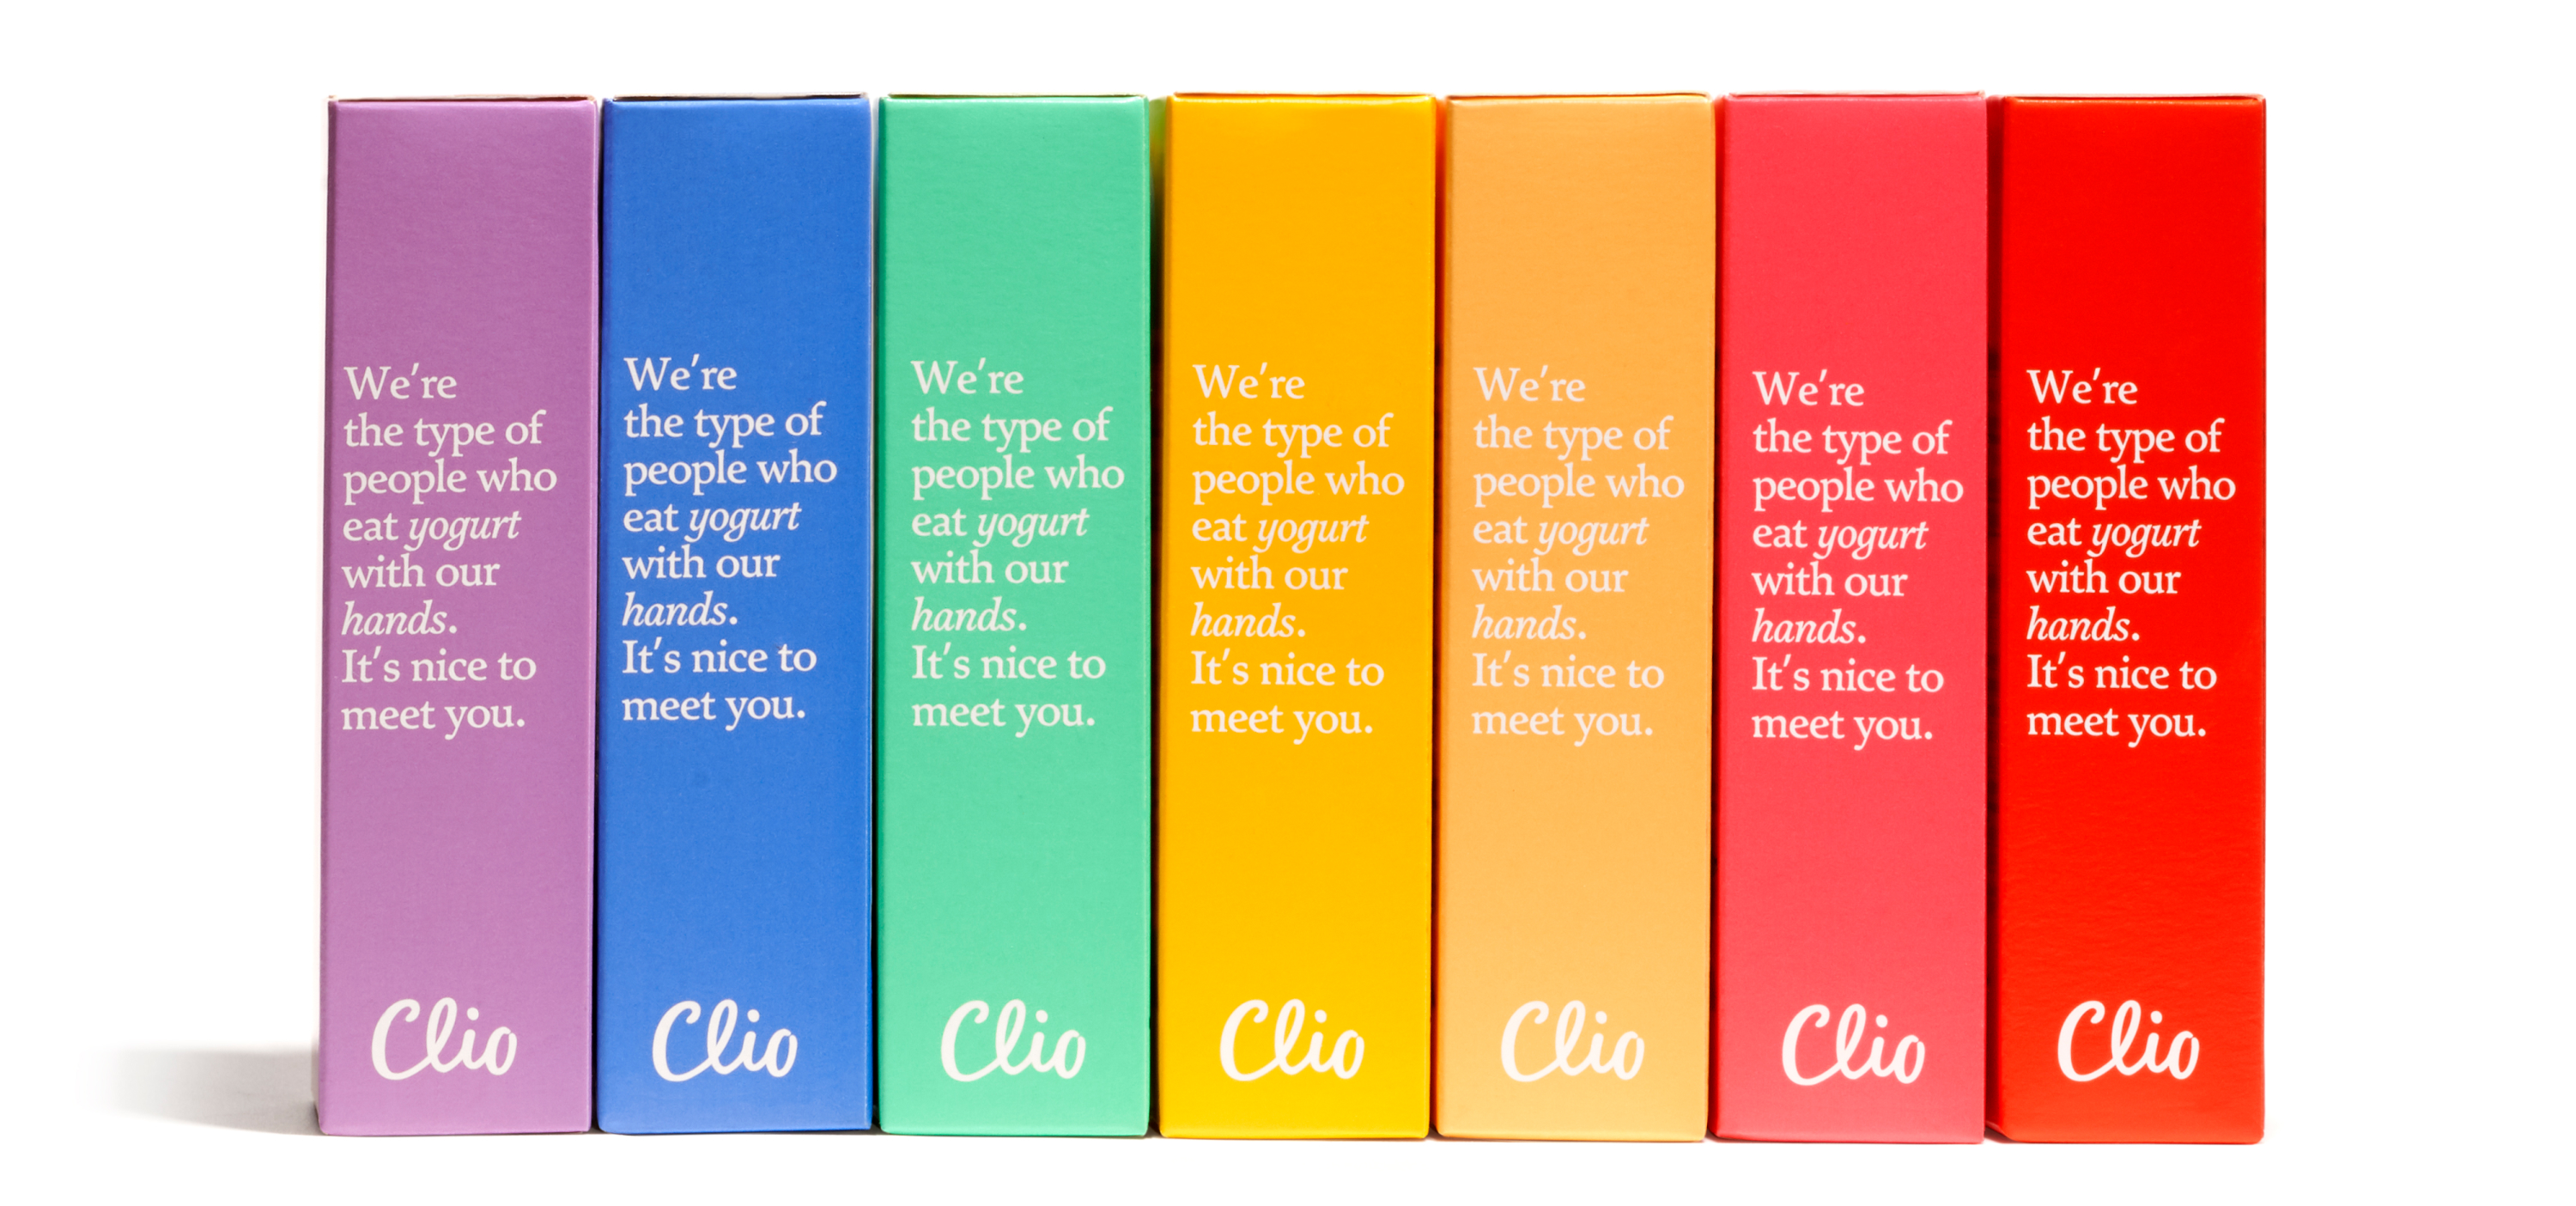 Clio packaging